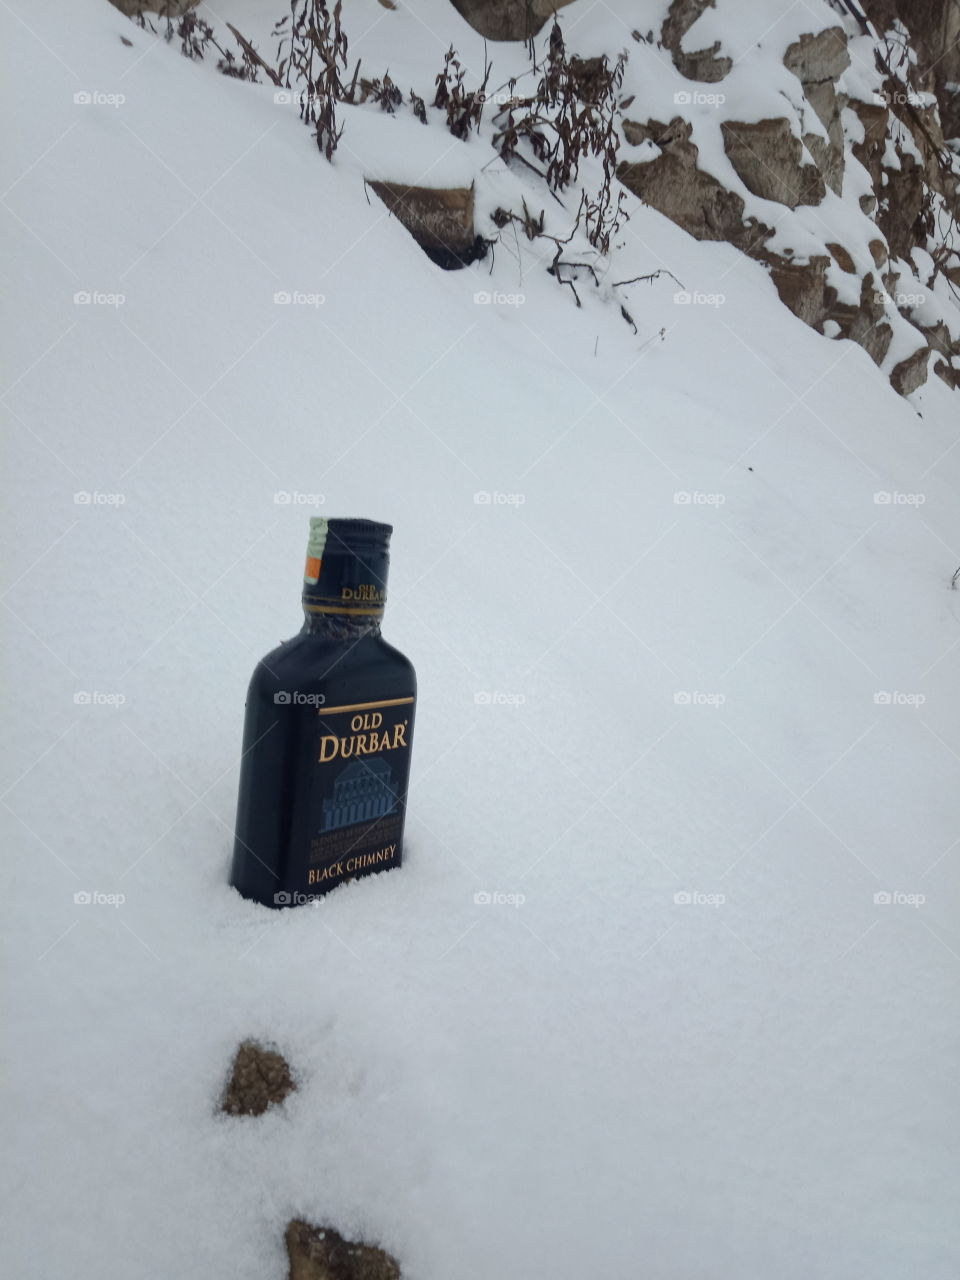 Whisky and snow